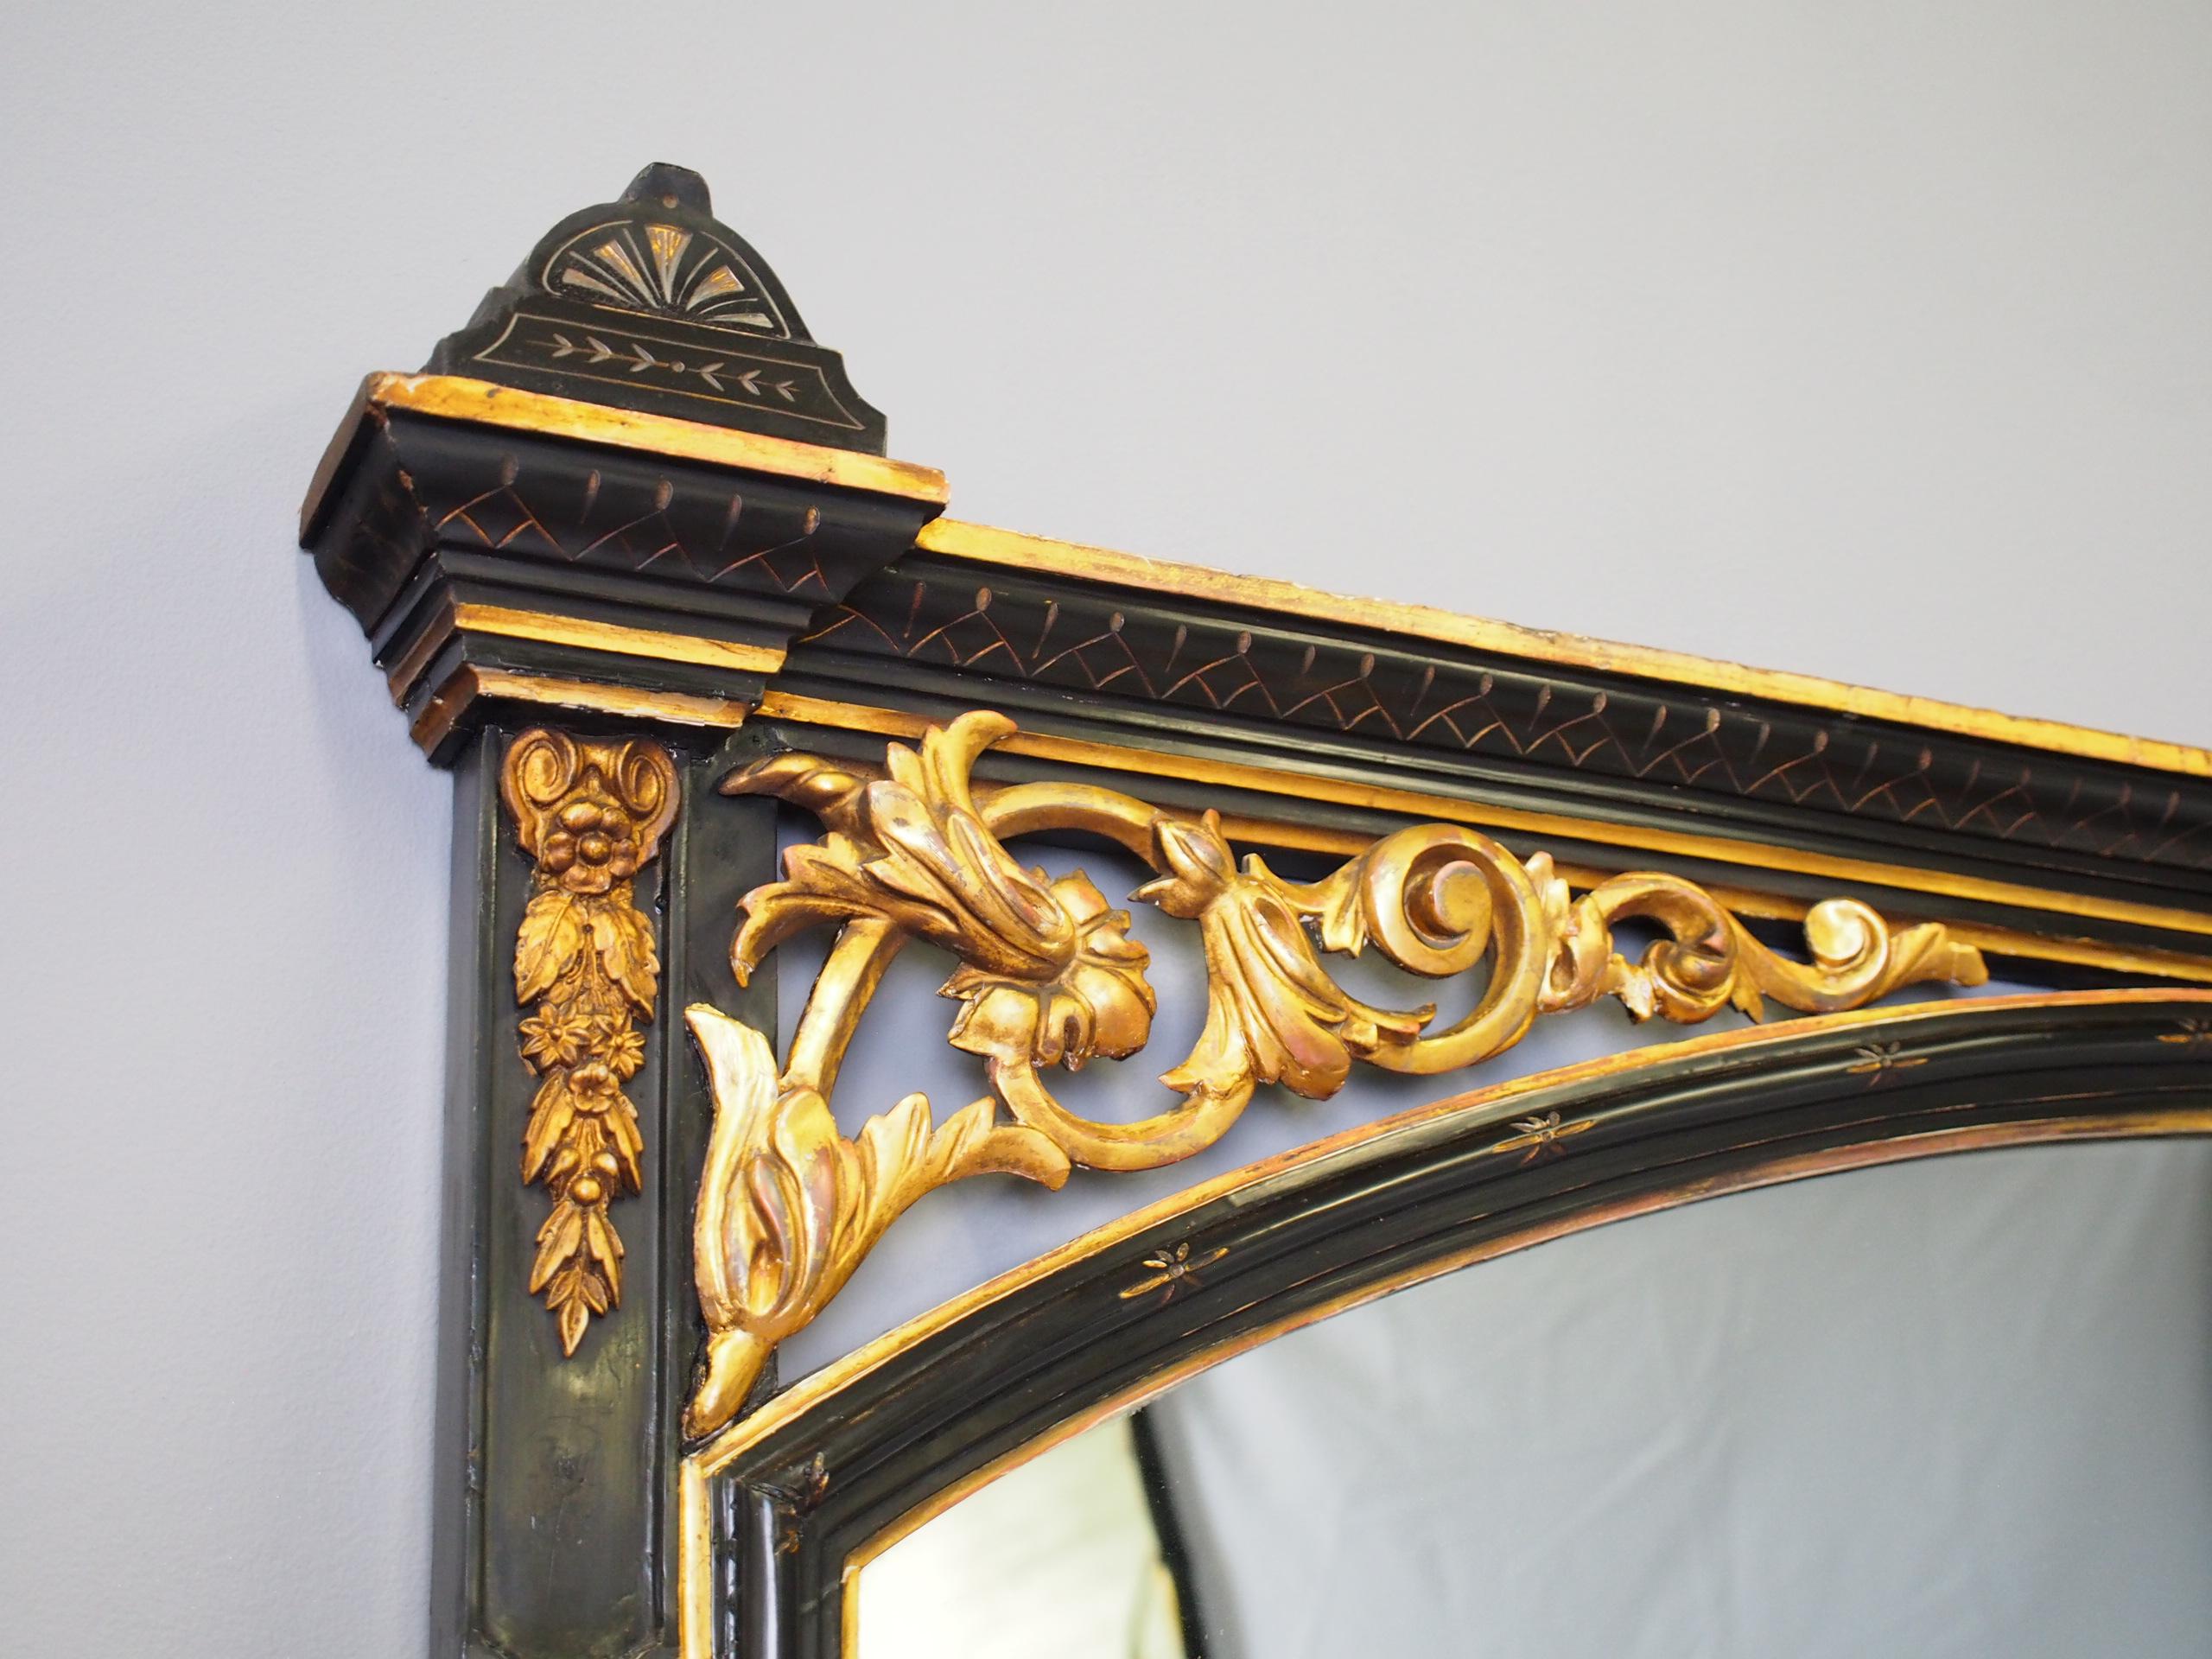 Aesthetic movement style gilded and ebonized wood overmantel mirror, circa 1880. The top has a mixture of painted and gilding, each end capped with 2 finials and beneath is an arched mirror with open fretwork and gilded foliate carving. There are 2